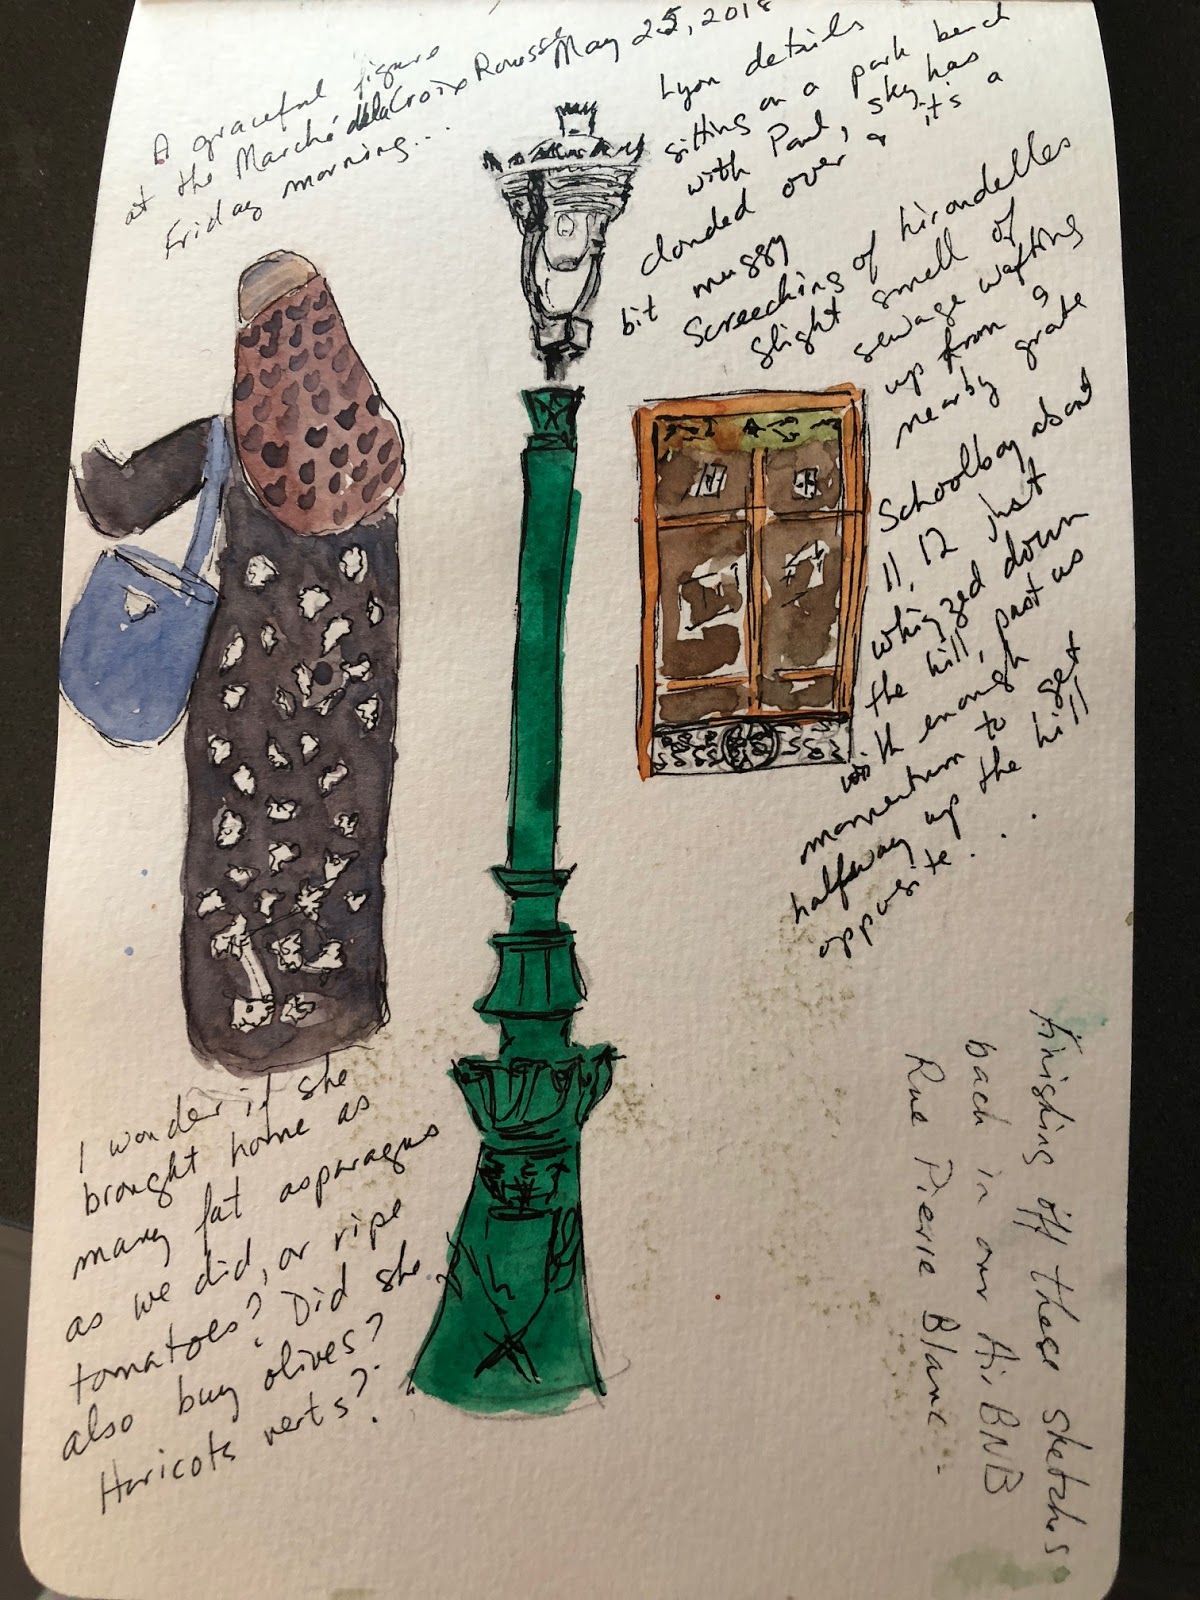 More Lyon: A Page from my Travel Journal